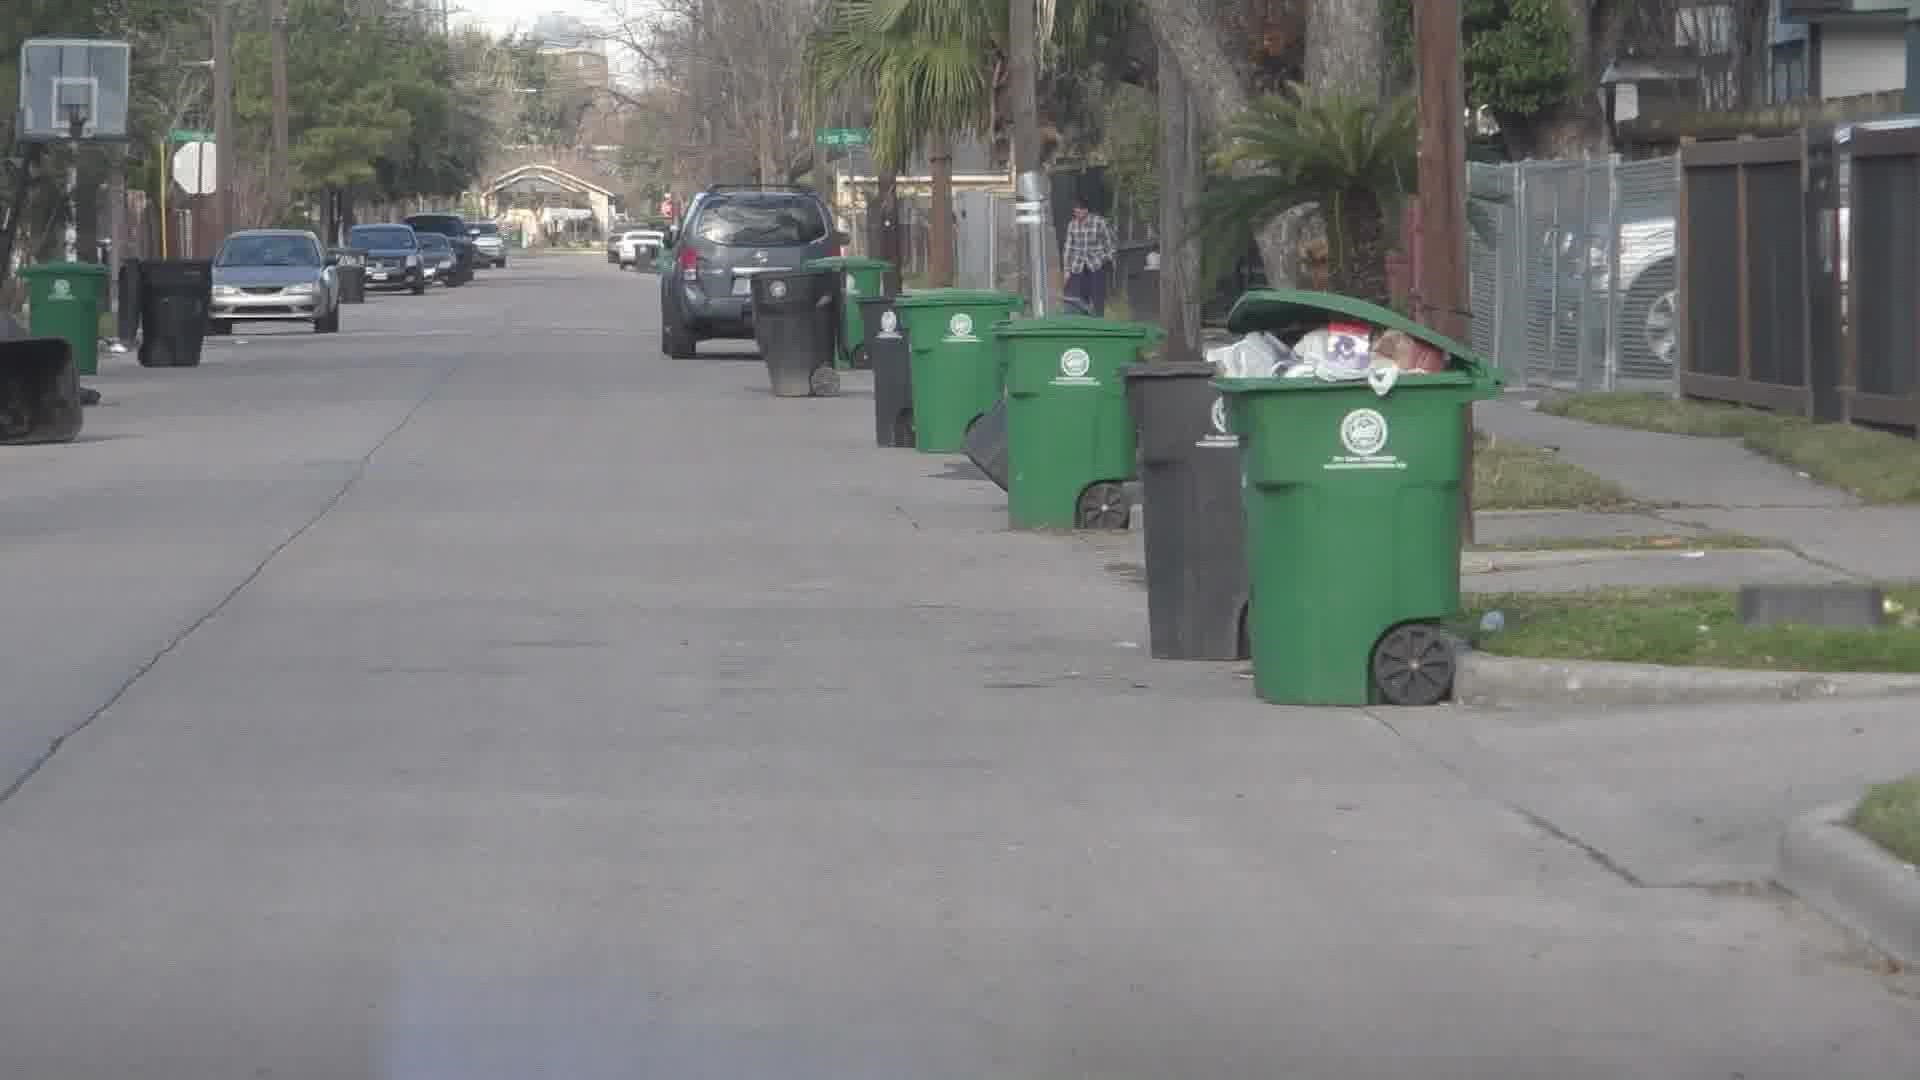 Forty percent of the items put in the City of Houston green bins end up being hauled to the landfill.